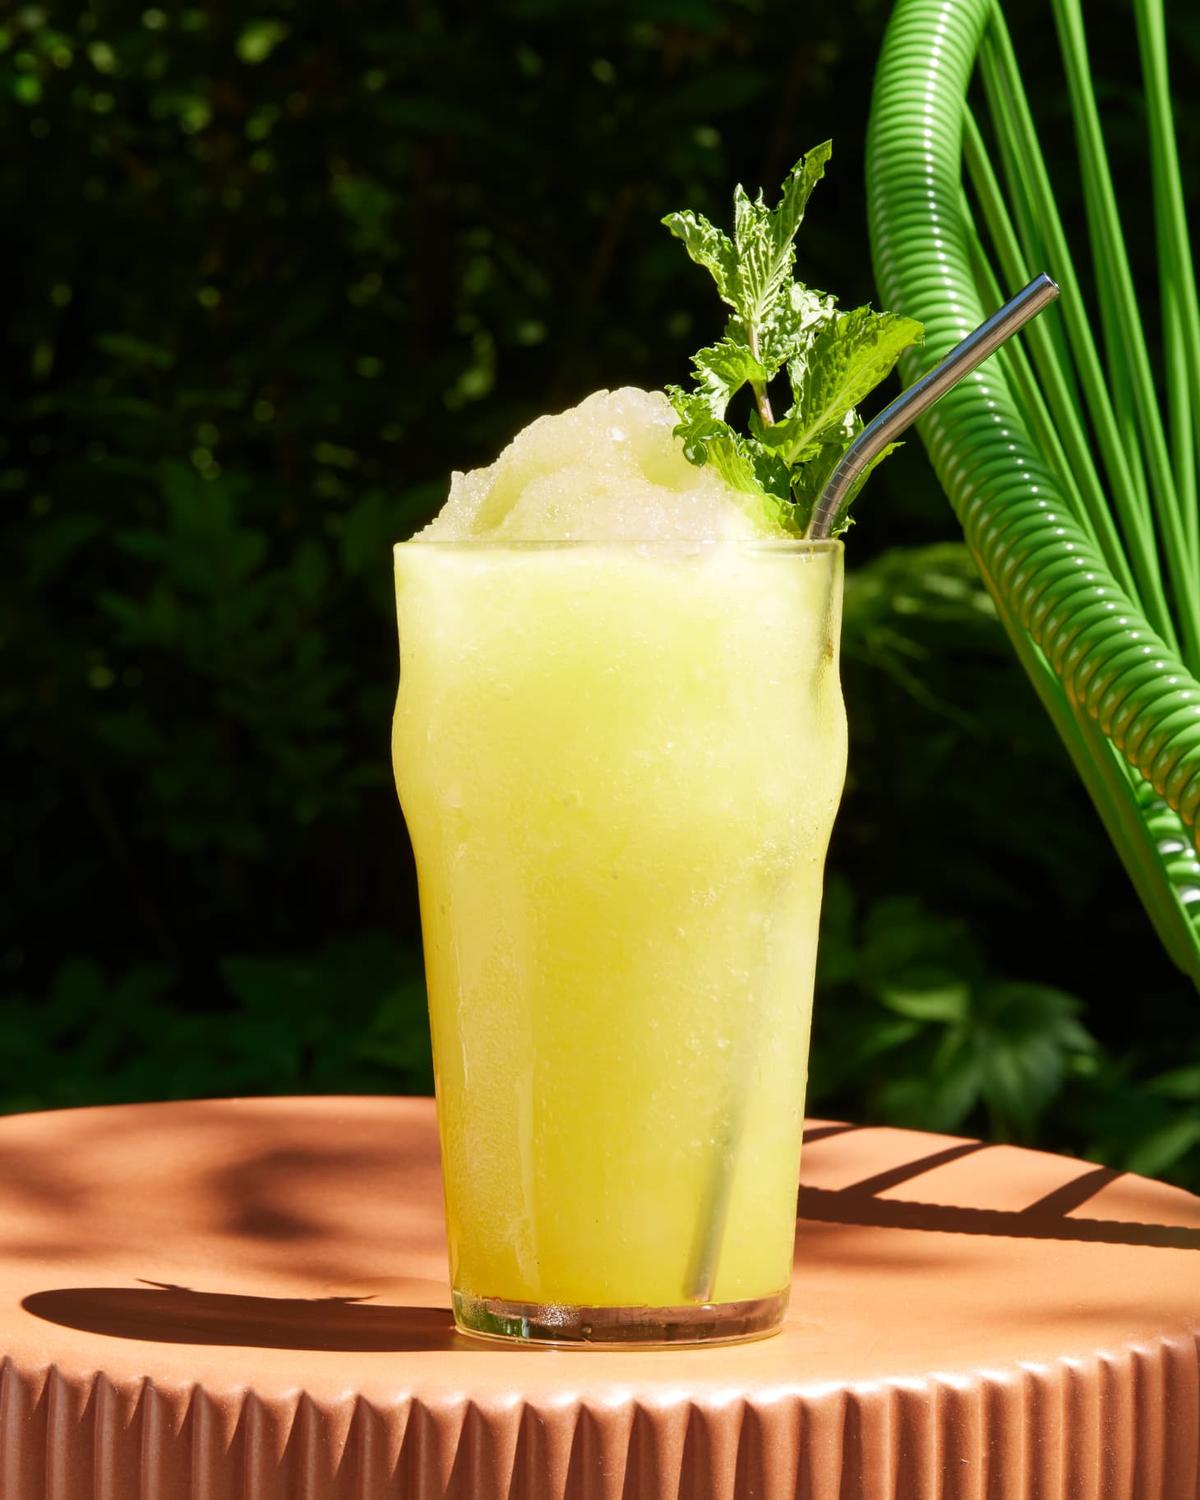 It only takes a few simple ingredients to whip up a lemon slushie at home. (Tara Donne/TNS)